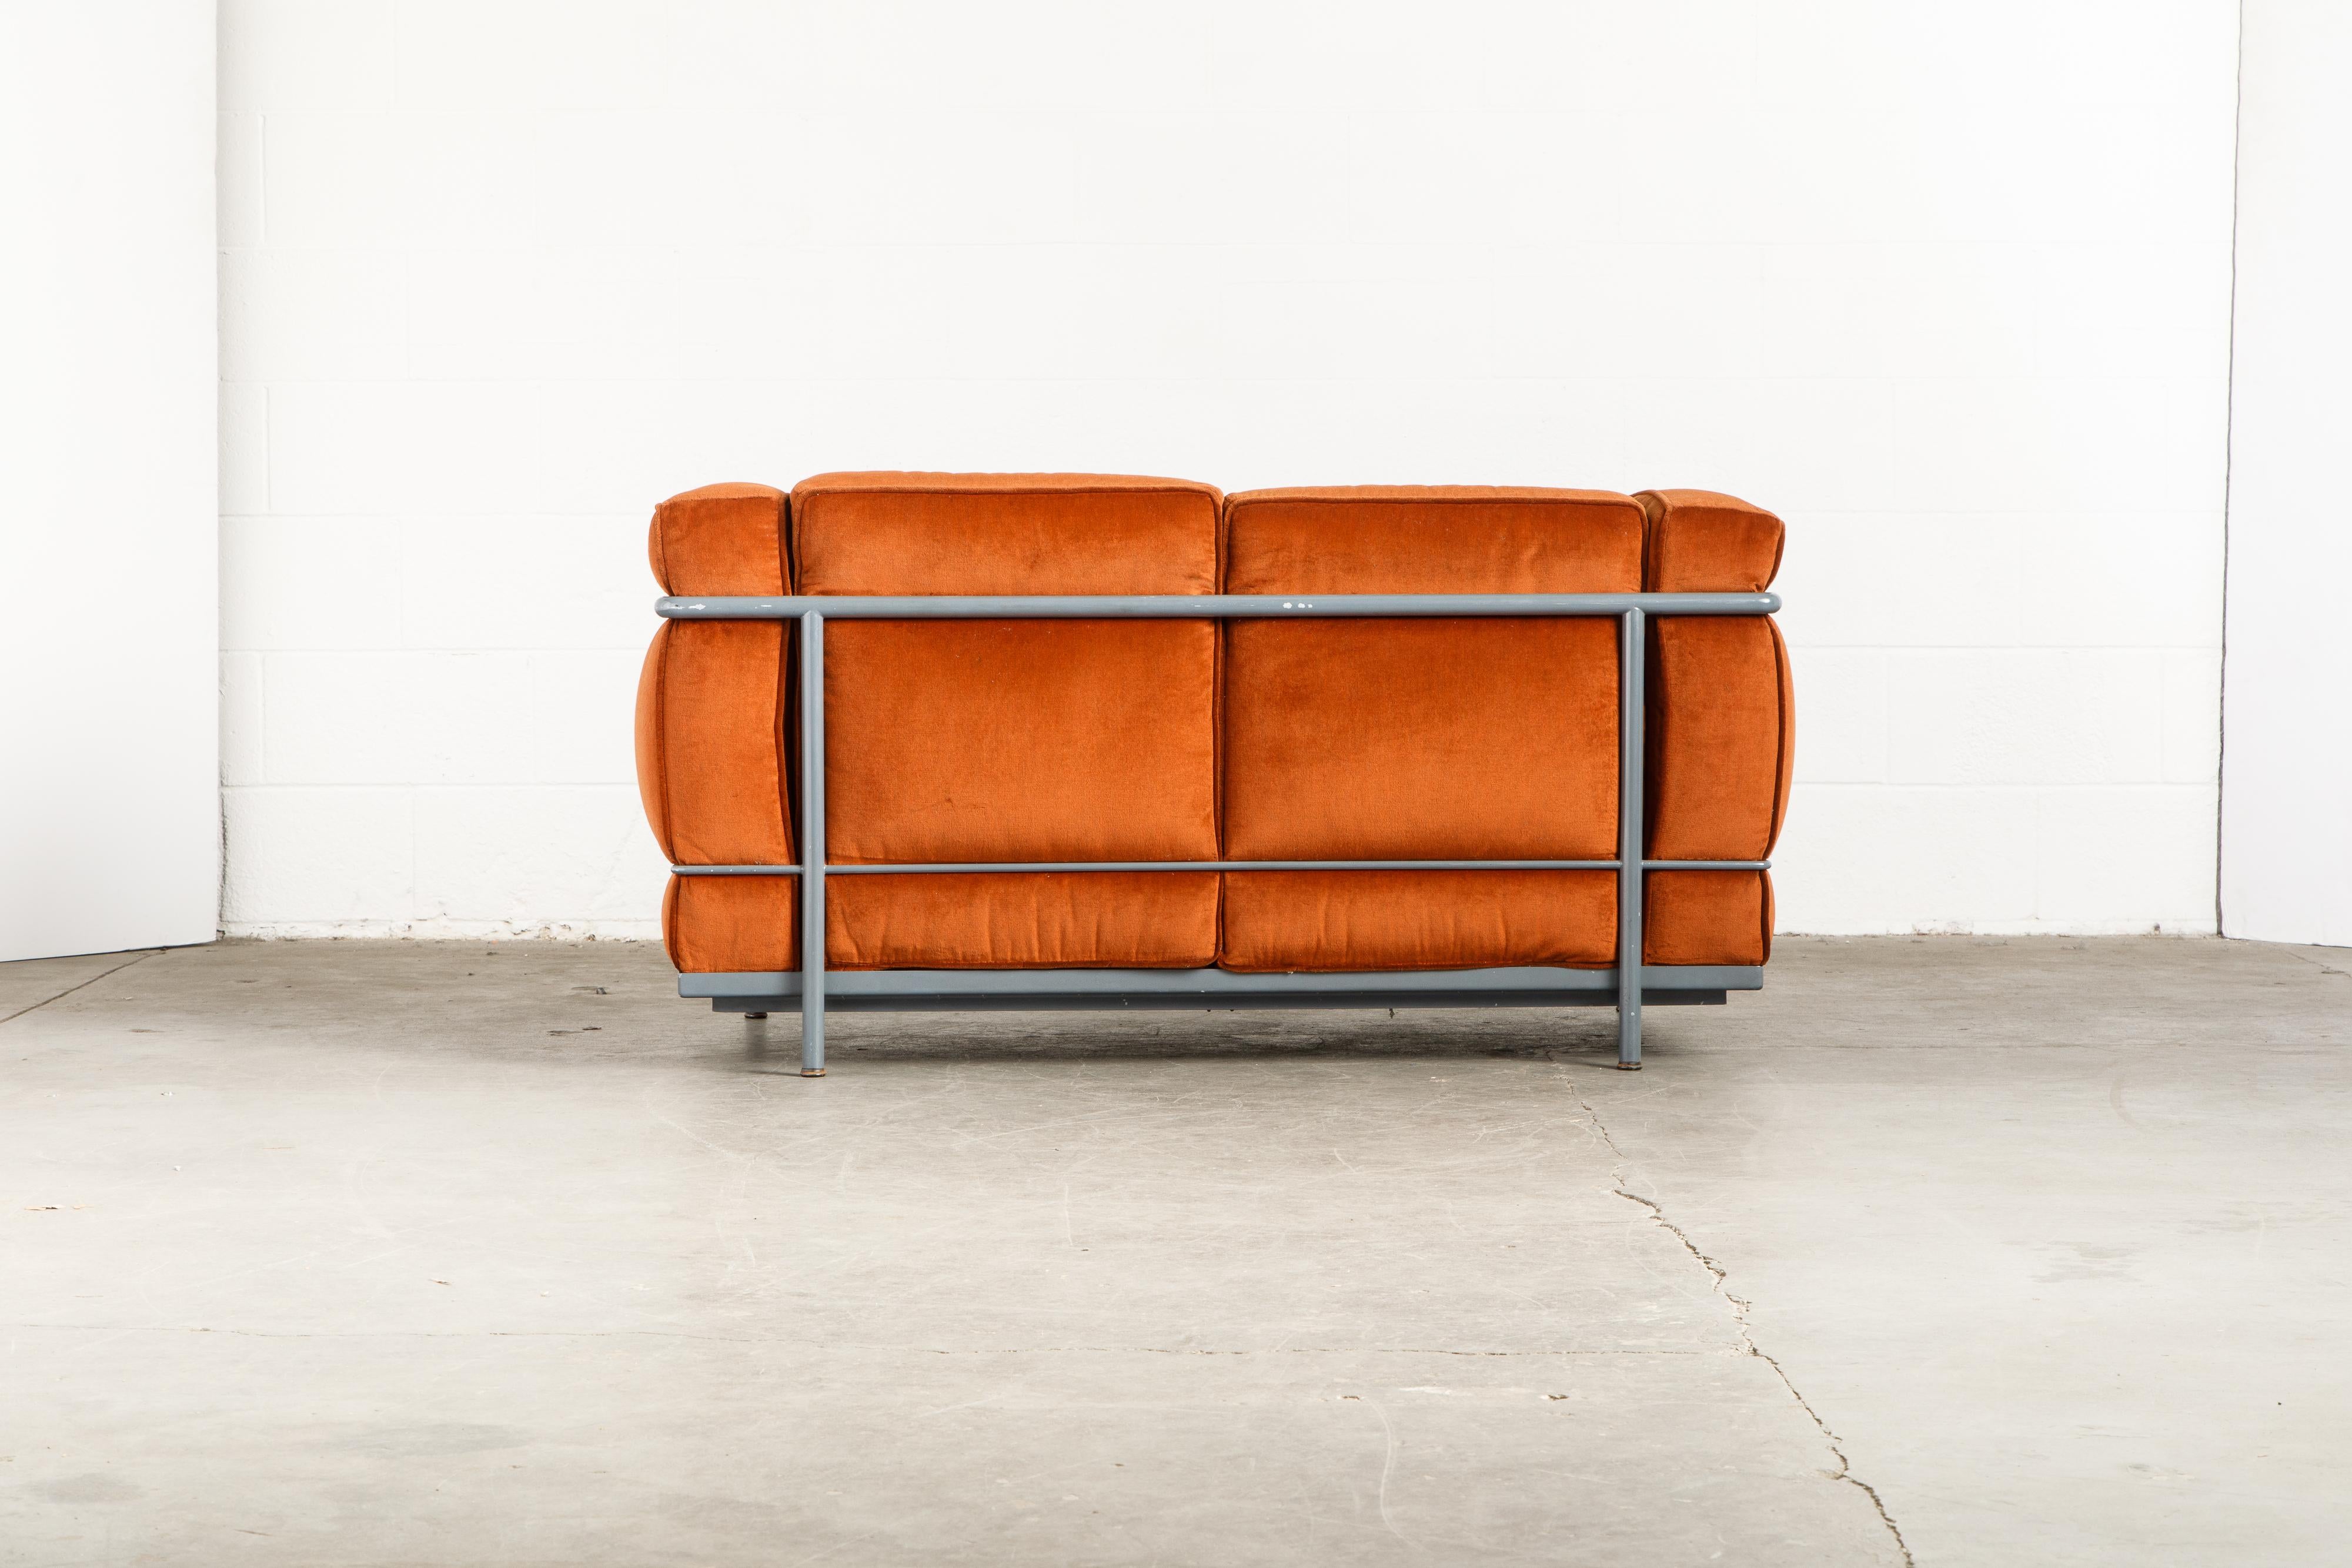 Italian Early Production LC2 Loveseat Sofa by Le Corbusier for Cassina, c. 1965, Signed